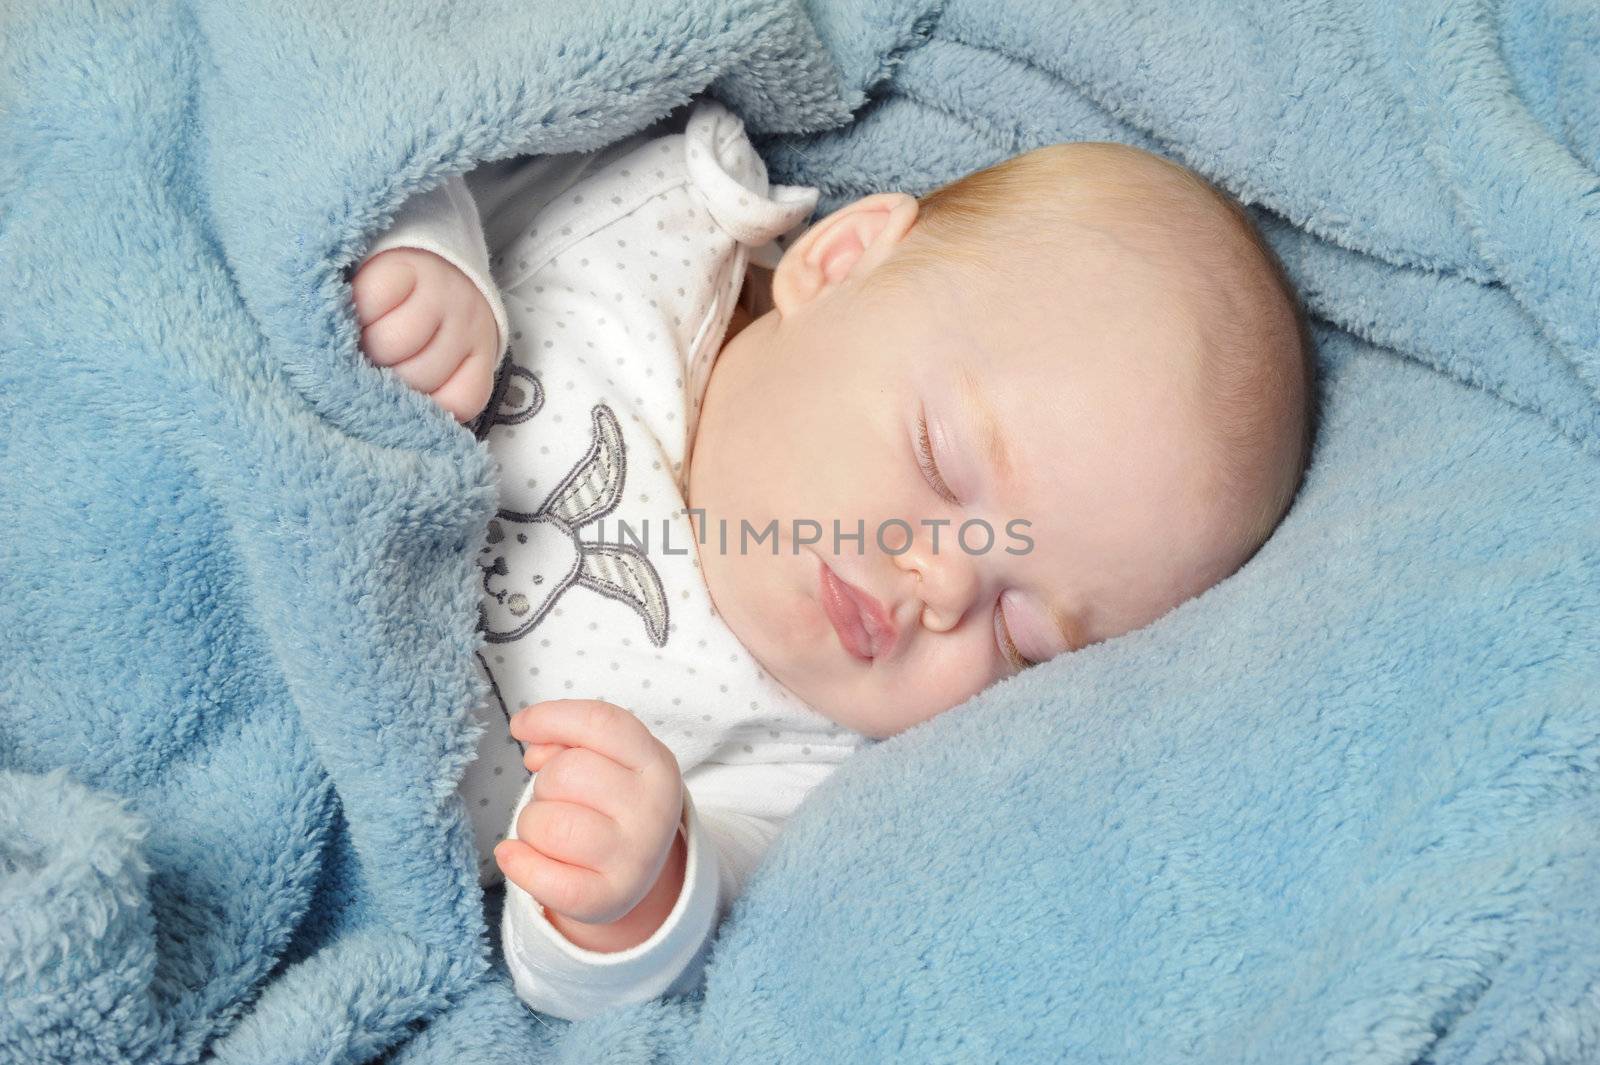 Adorable little baby sleeping peacefully on a blanket